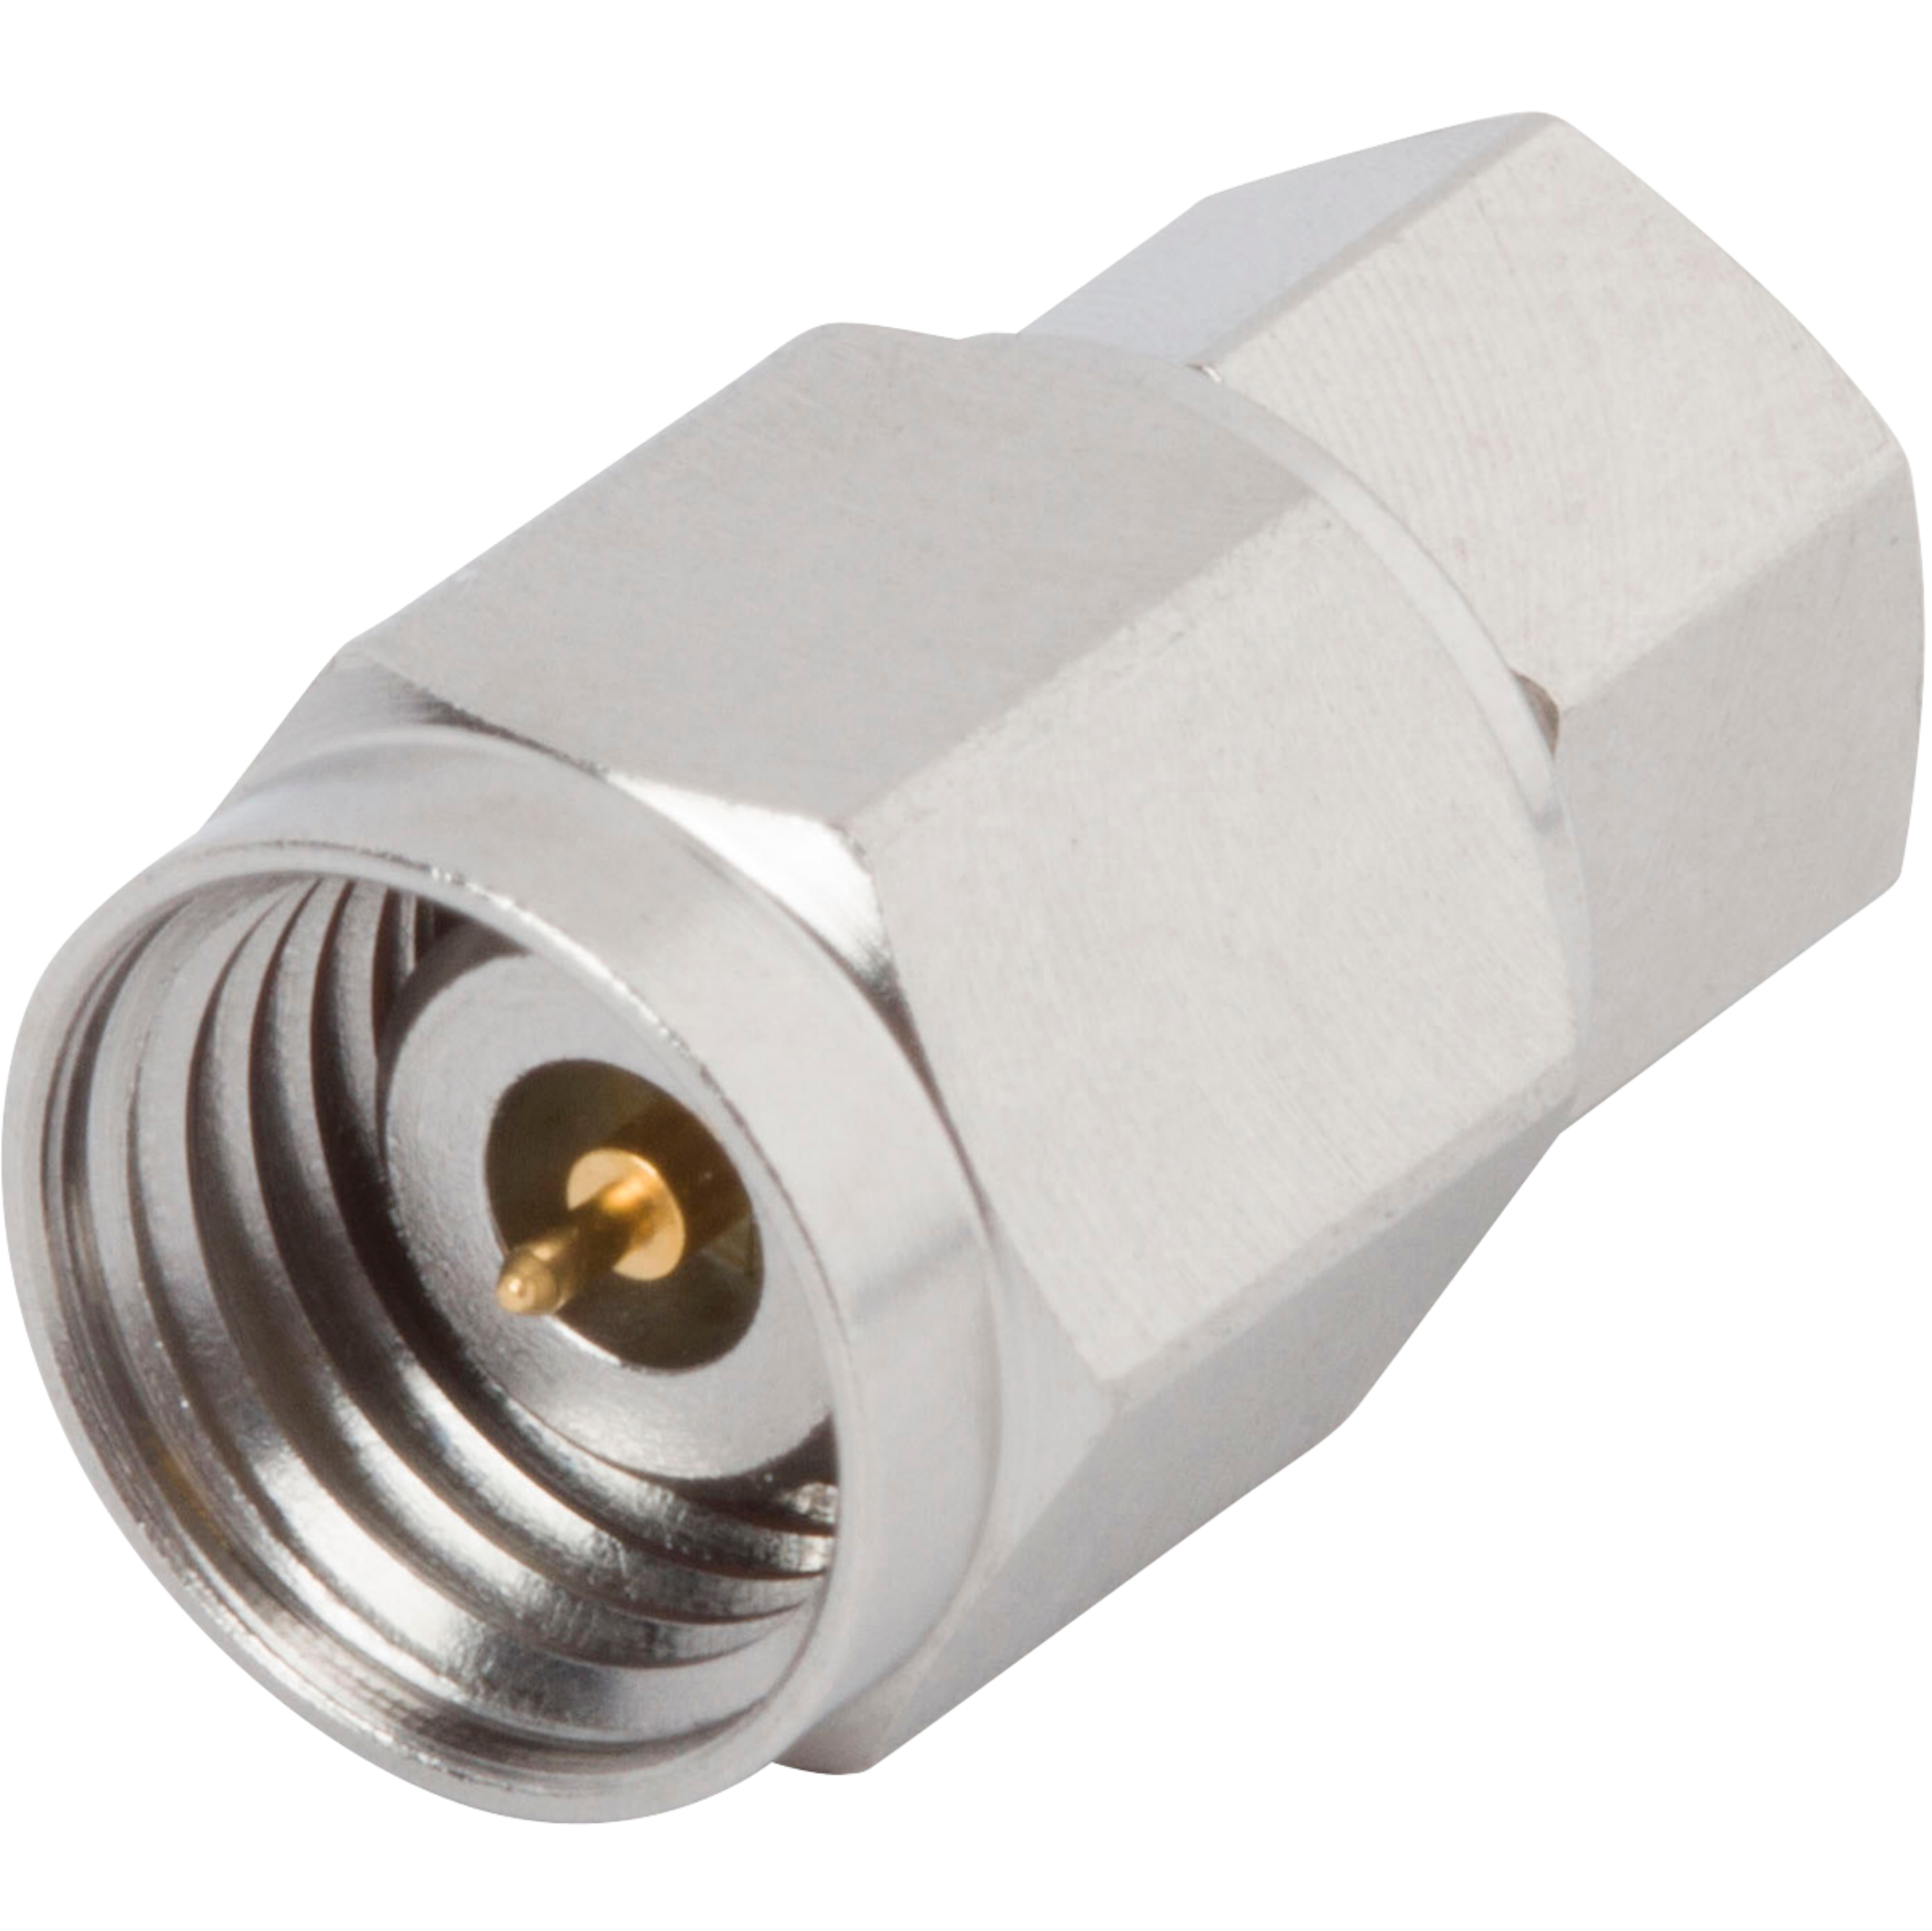 2.4mm Male Connector for .085 Cable, SF1611-60003